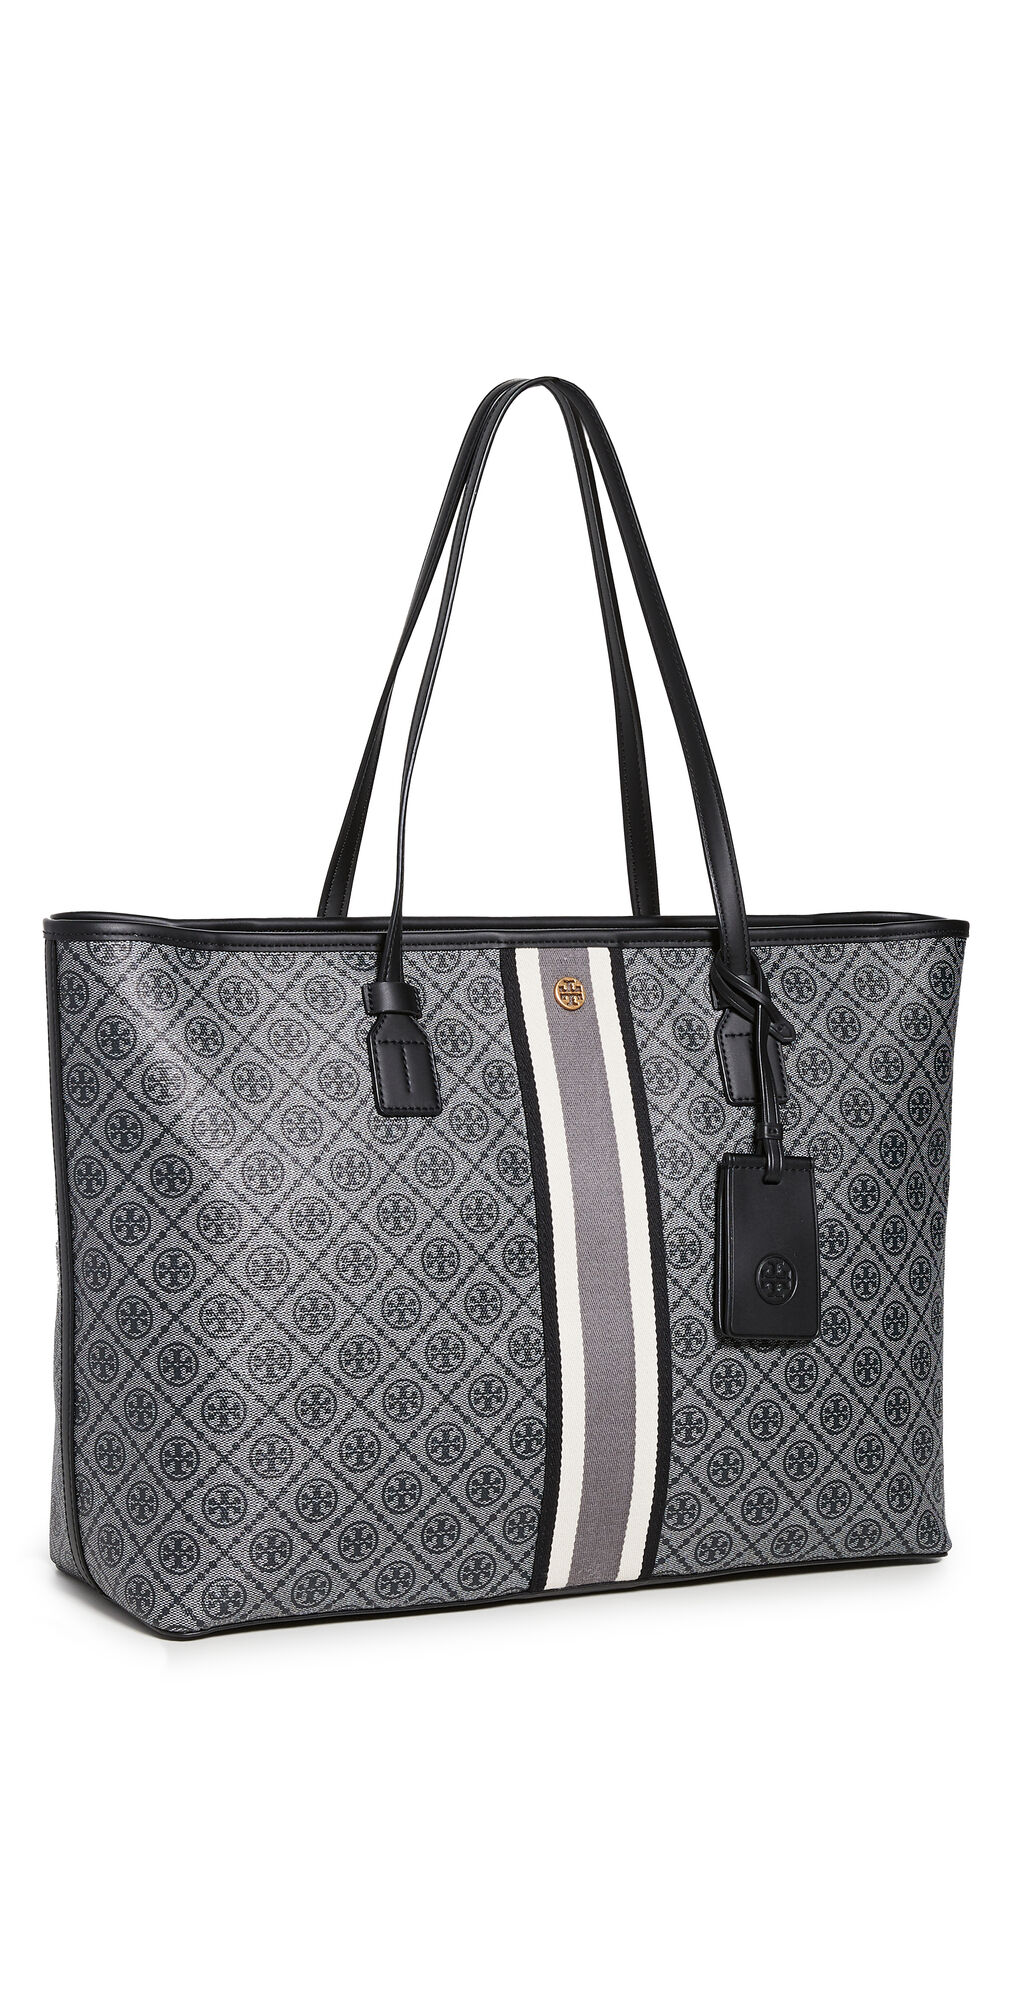 Tory Burch T Monogram Coated Canvas Tote Black One Size  Black  size:One Size